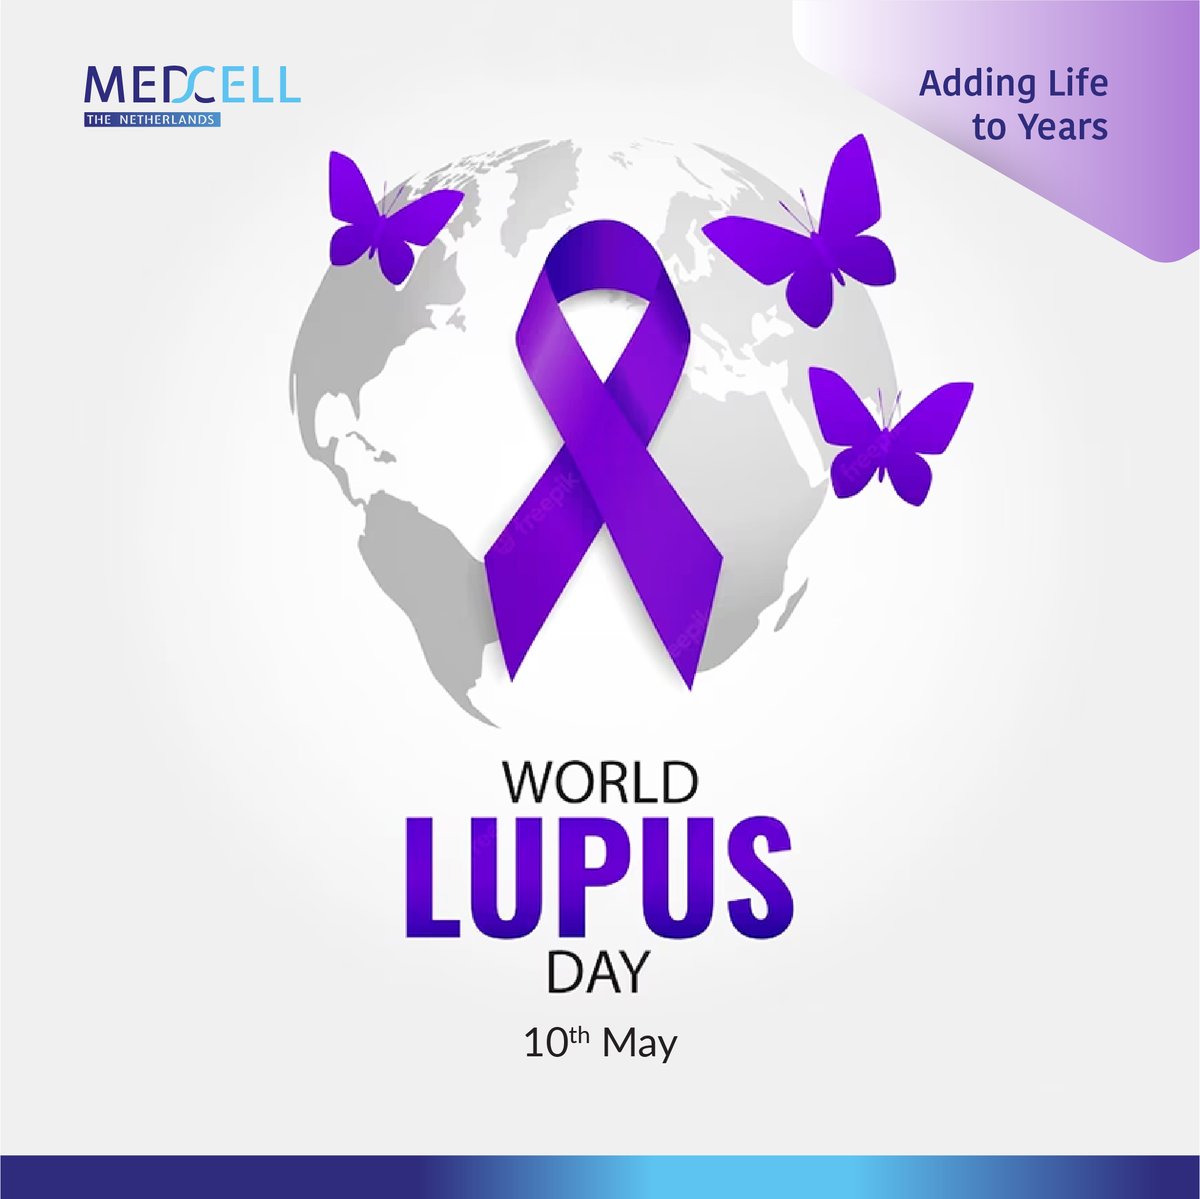 This #WorldLupusDay, let's stand together to support those living with #lupus & continue to advocate for better research & treatment options.  💜💜💜
#LupusAwareness #AutoimmuneDisease  #womenwellness #LupusWarrior #medcellpharma #pharmaceuticalindustry #addinglifetoyears